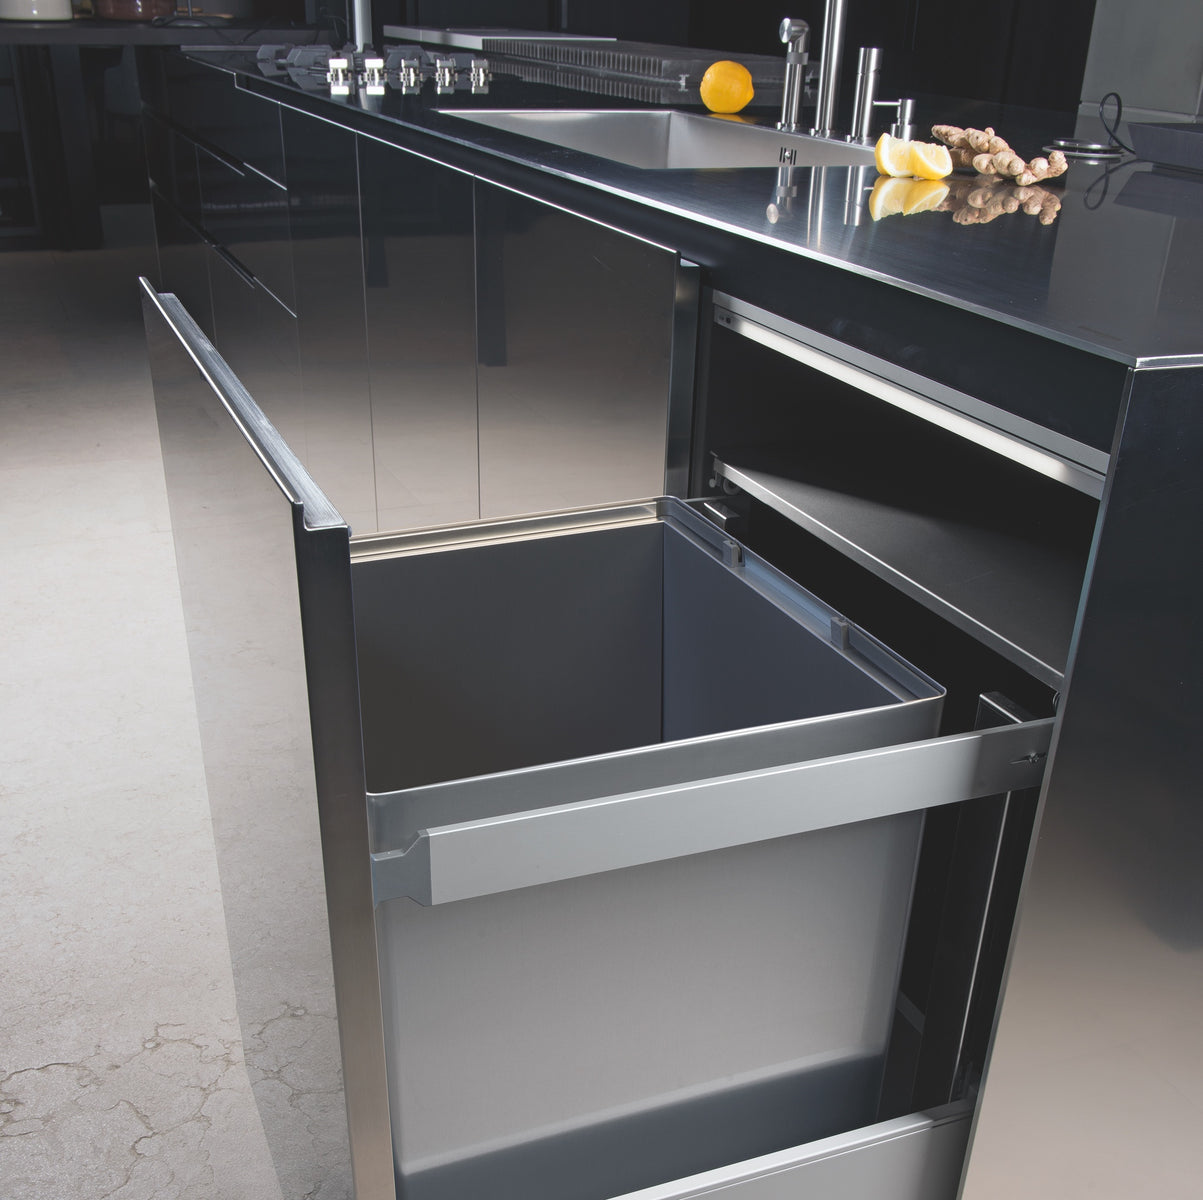 Introducing Tecnoinox pull-out In-cupboard Kitchen Bins: Superb Italian Styling & Craftsmanship